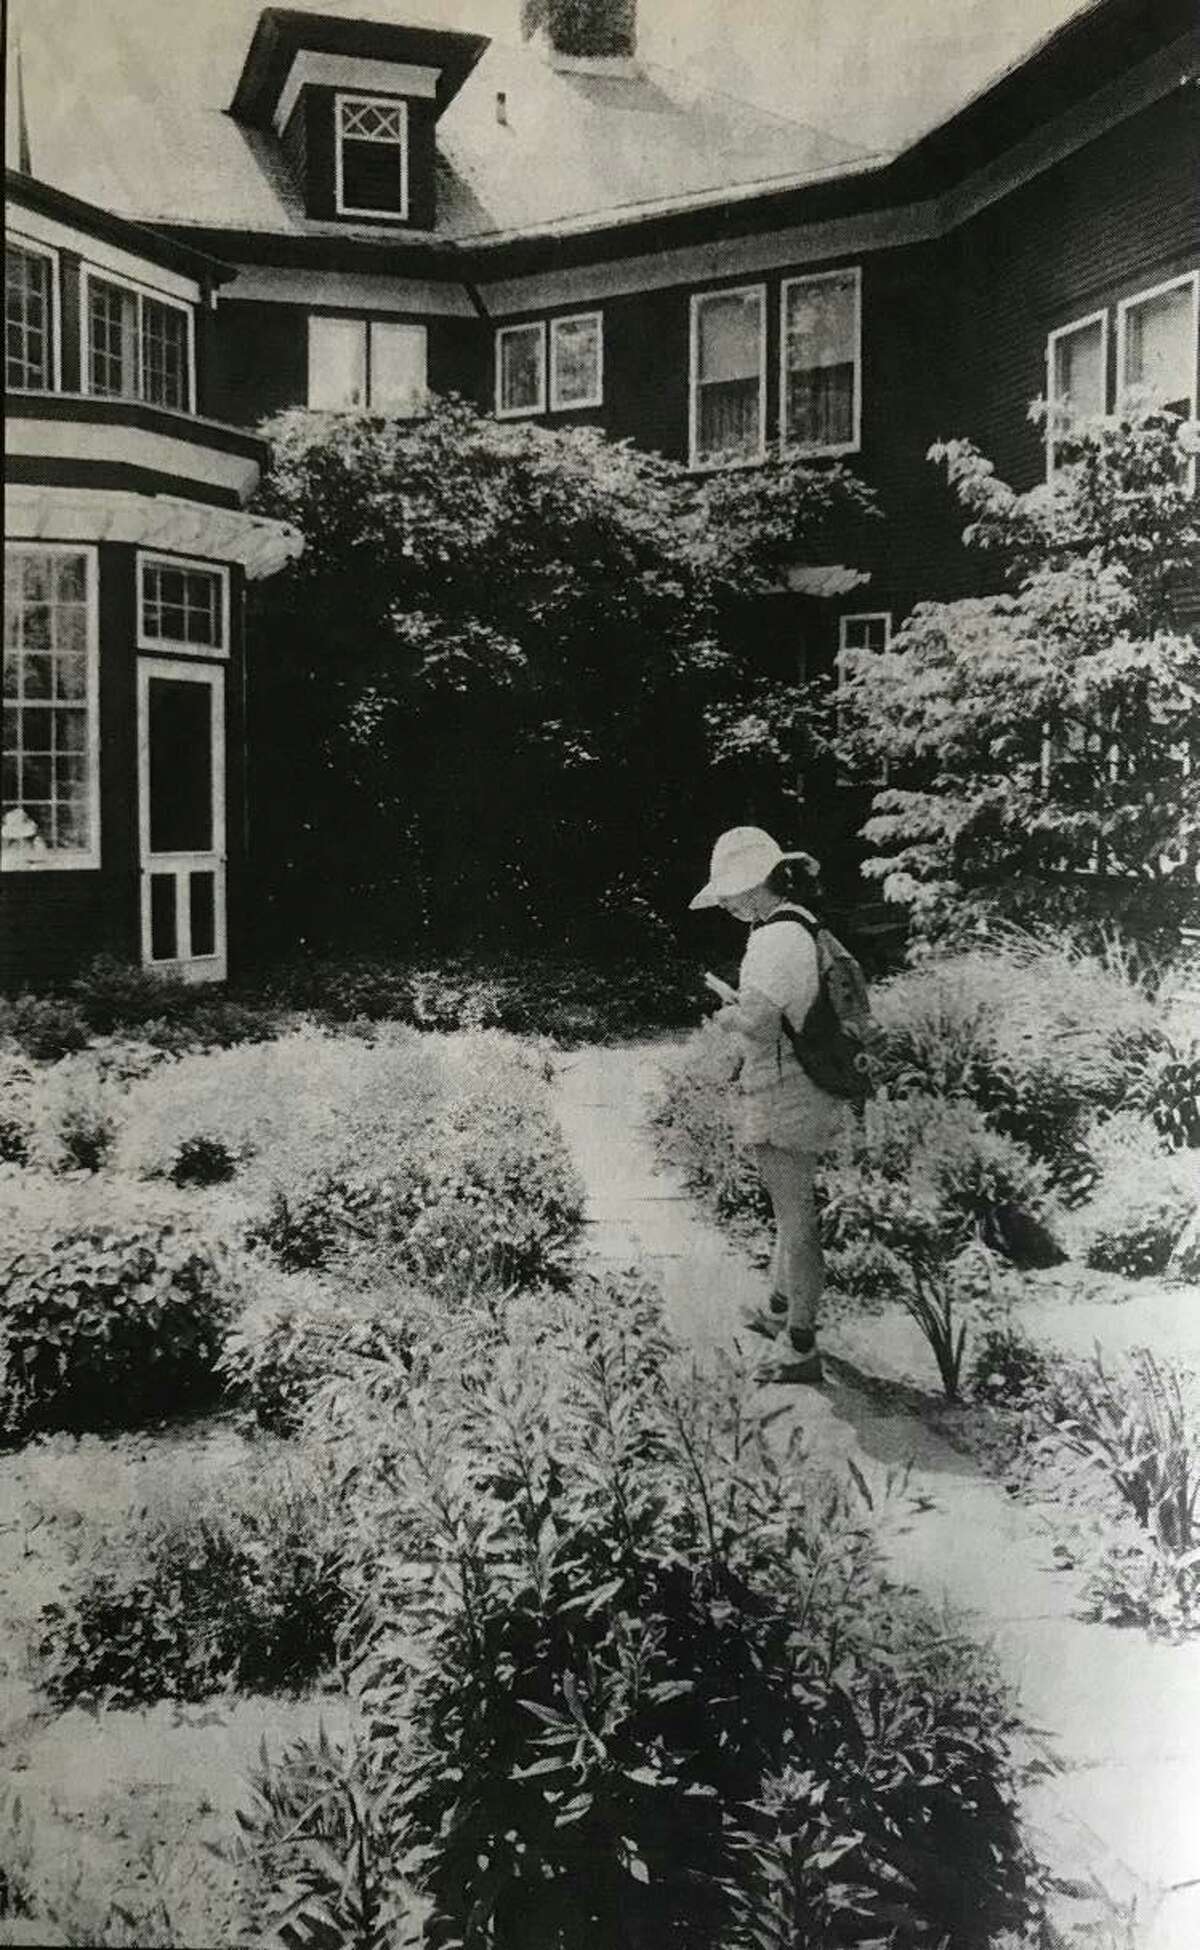 Horticulturist Jane Cameron studies the herbs and plants in the kitchen garden at the rear of the former Dow home. June 1991